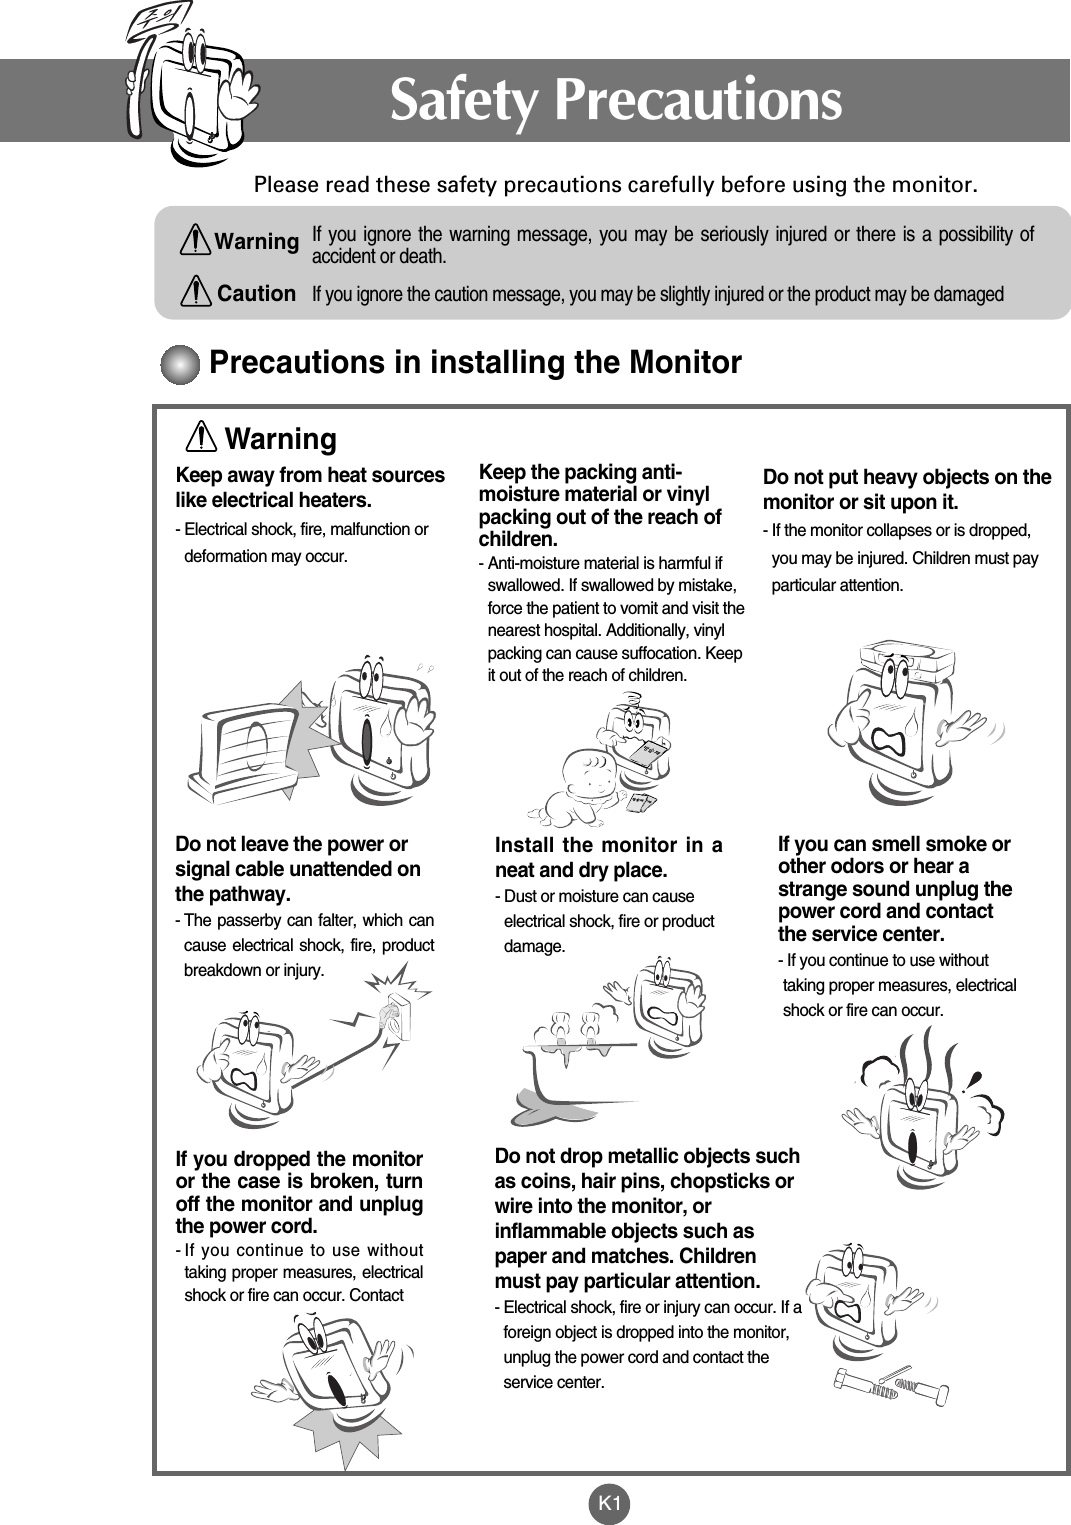 K1Please read these safety precautions carefully before using the monitor.Precautions in installing the MonitorIf you ignore the caution message, you may be slightly injured or the product may be damagedIf you ignore the warning message, you may be seriously injured or there is a possibility ofaccident or death.Keep away from heat sourceslike electrical heaters.- Electrical shock, fire, malfunction ordeformation may occur.Keep the packing anti-moisture material or vinylpacking out of the reach ofchildren.- Anti-moisture material is harmful ifswallowed. If swallowed by mistake,force the patient to vomit and visit thenearest hospital. Additionally, vinylpacking can cause suffocation. Keepit out of the reach of children.Install the monitor in aneat and dry place.- Dust or moisture can causeelectrical shock, fire or productdamage. Do not leave the power orsignal cable unattended onthe pathway.- The passerby can falter, which cancause electrical shock, fire, productbreakdown or injury.If you can smell smoke orother odors or hear astrange sound unplug thepower cord and contactthe service center. - If you continue to use withouttaking proper measures, electricalshock or fire can occur.If you dropped the monitoror the case is broken, turnoff the monitor and unplugthe power cord. - If you continue to use withouttaking proper measures, electricalshock or fire can occur. Contact Do not drop metallic objects suchas coins, hair pins, chopsticks orwire into the monitor, orinflammable objects such aspaper and matches. Childrenmust pay particular attention.- Electrical shock, fire or injury can occur. If aforeign object is dropped into the monitor,unplug the power cord and contact theservice center.Do not put heavy objects on themonitor or sit upon it. - If the monitor collapses or is dropped,you may be injured. Children must payparticular attention.Safety PrecautionsWarningWarningCaution